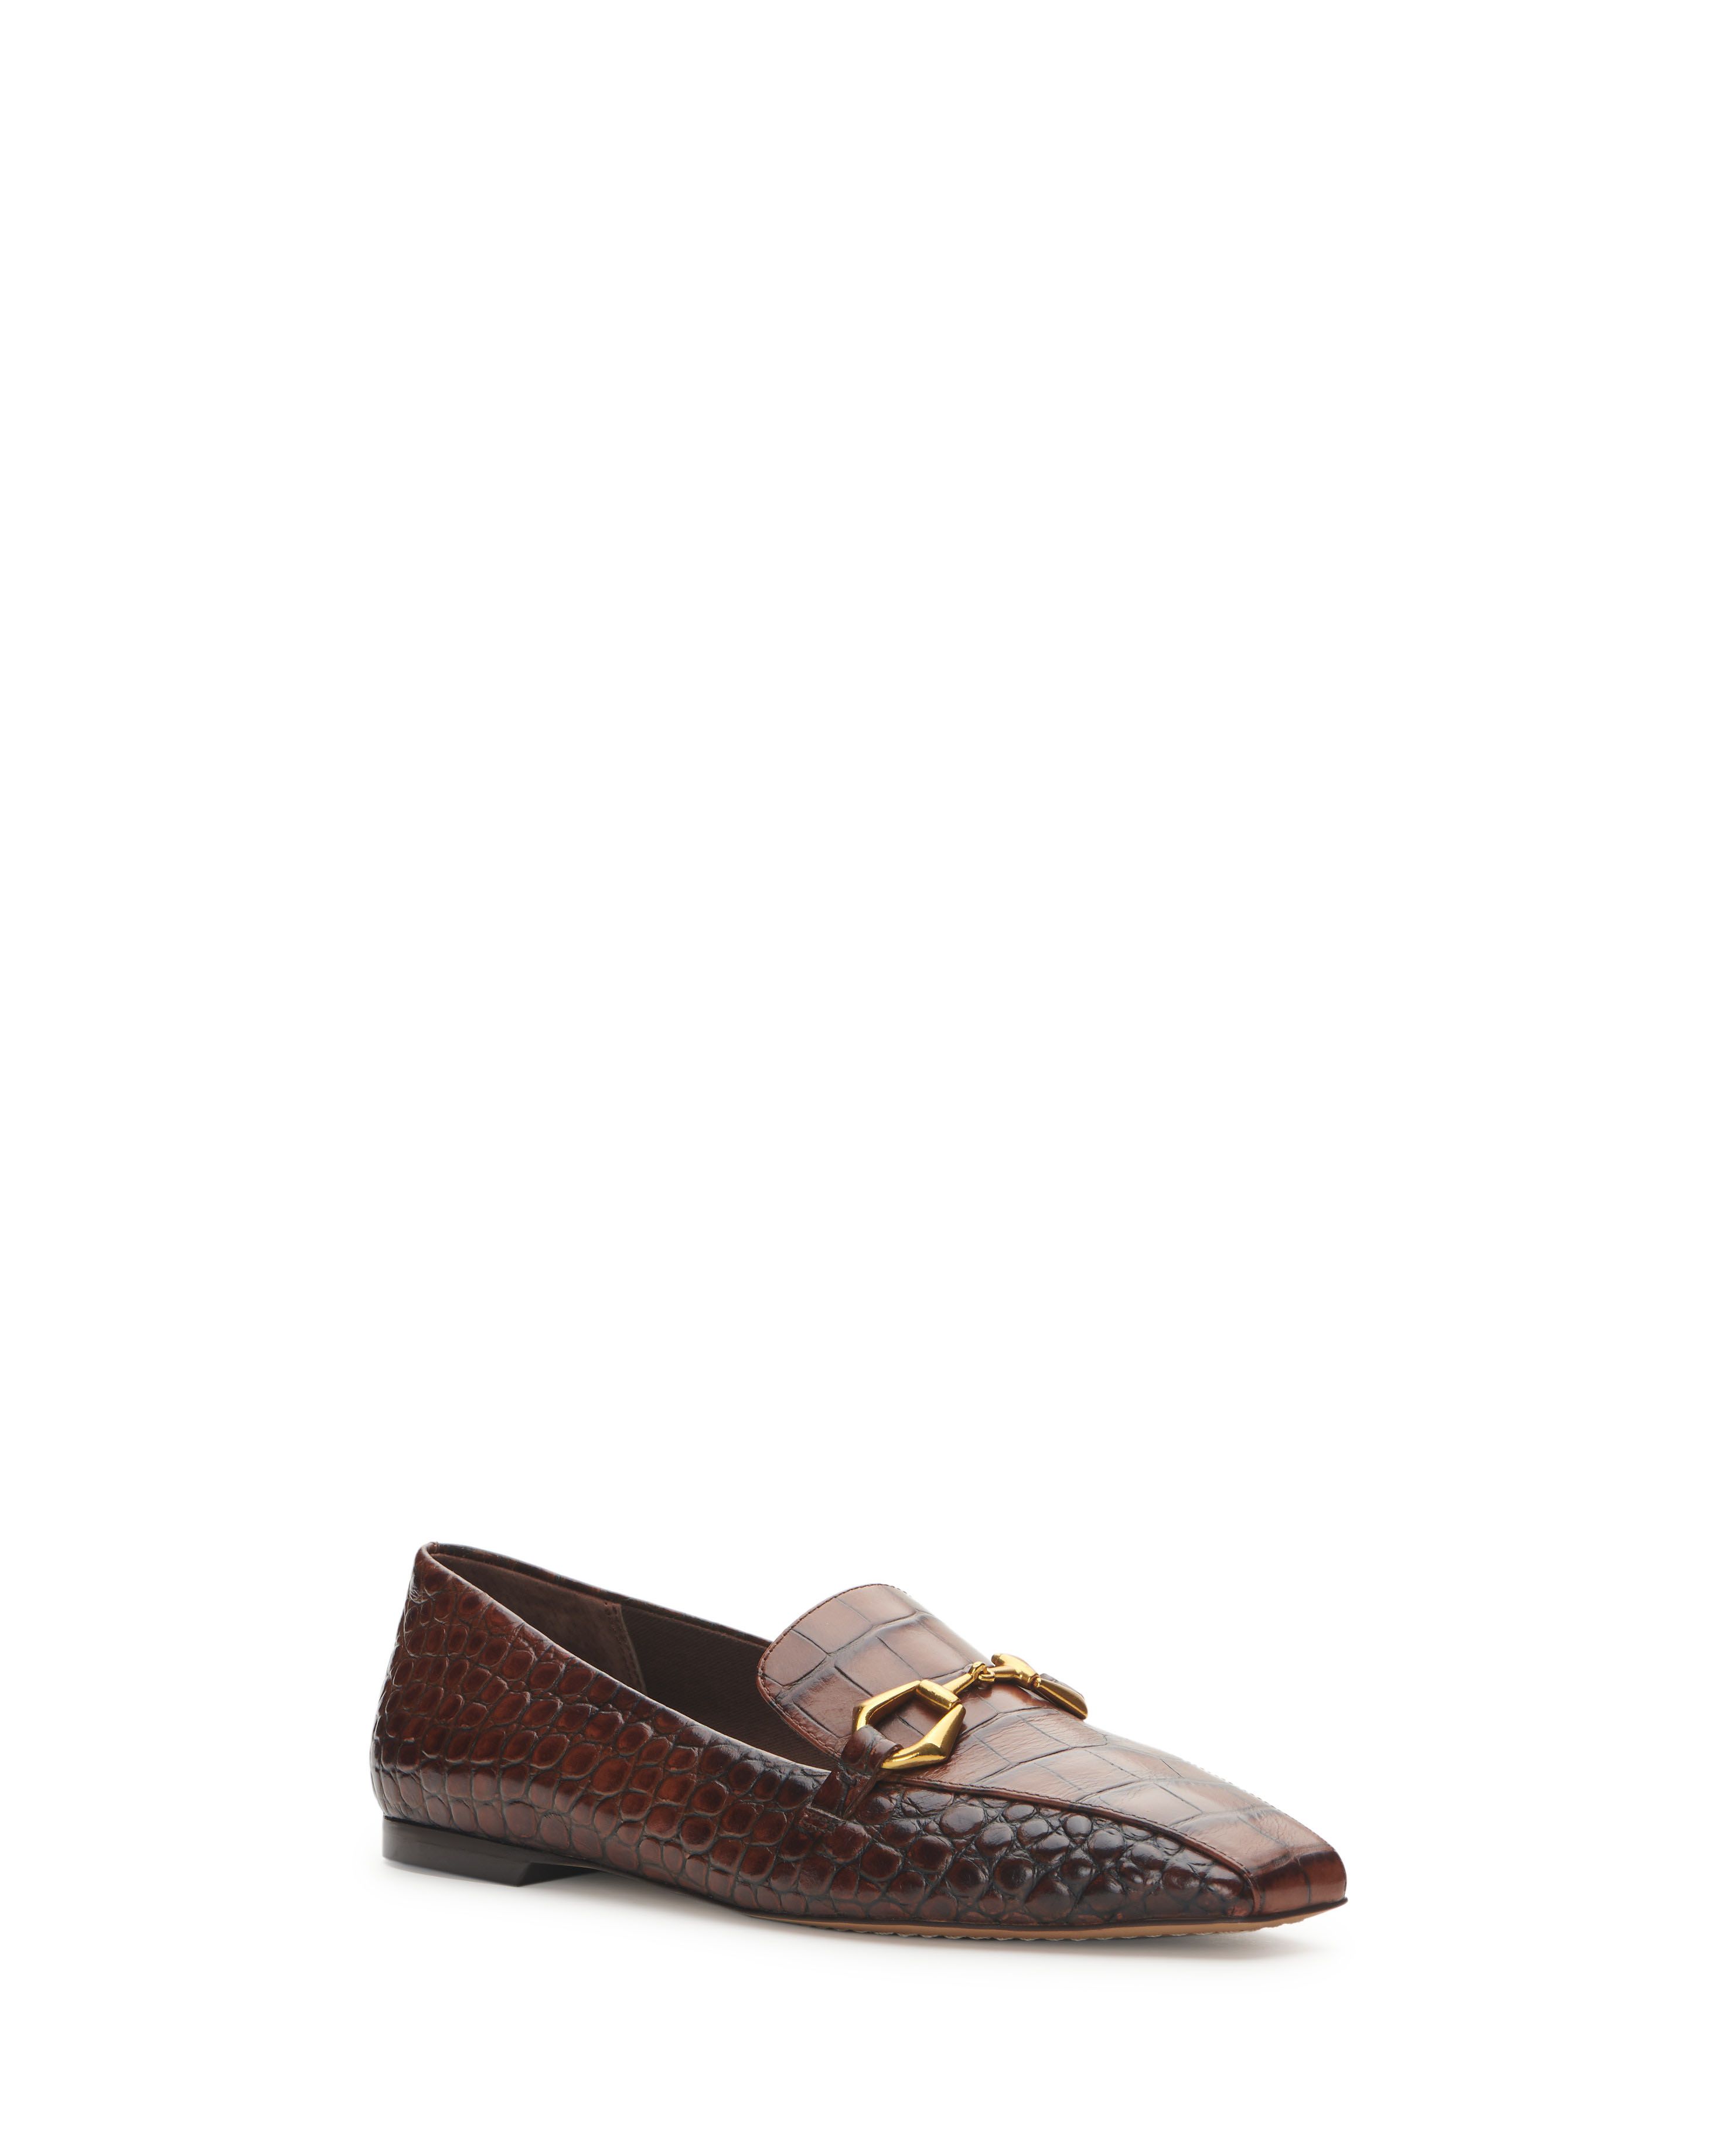 Vince Camuto Darmitta Loafer | Vince Camuto